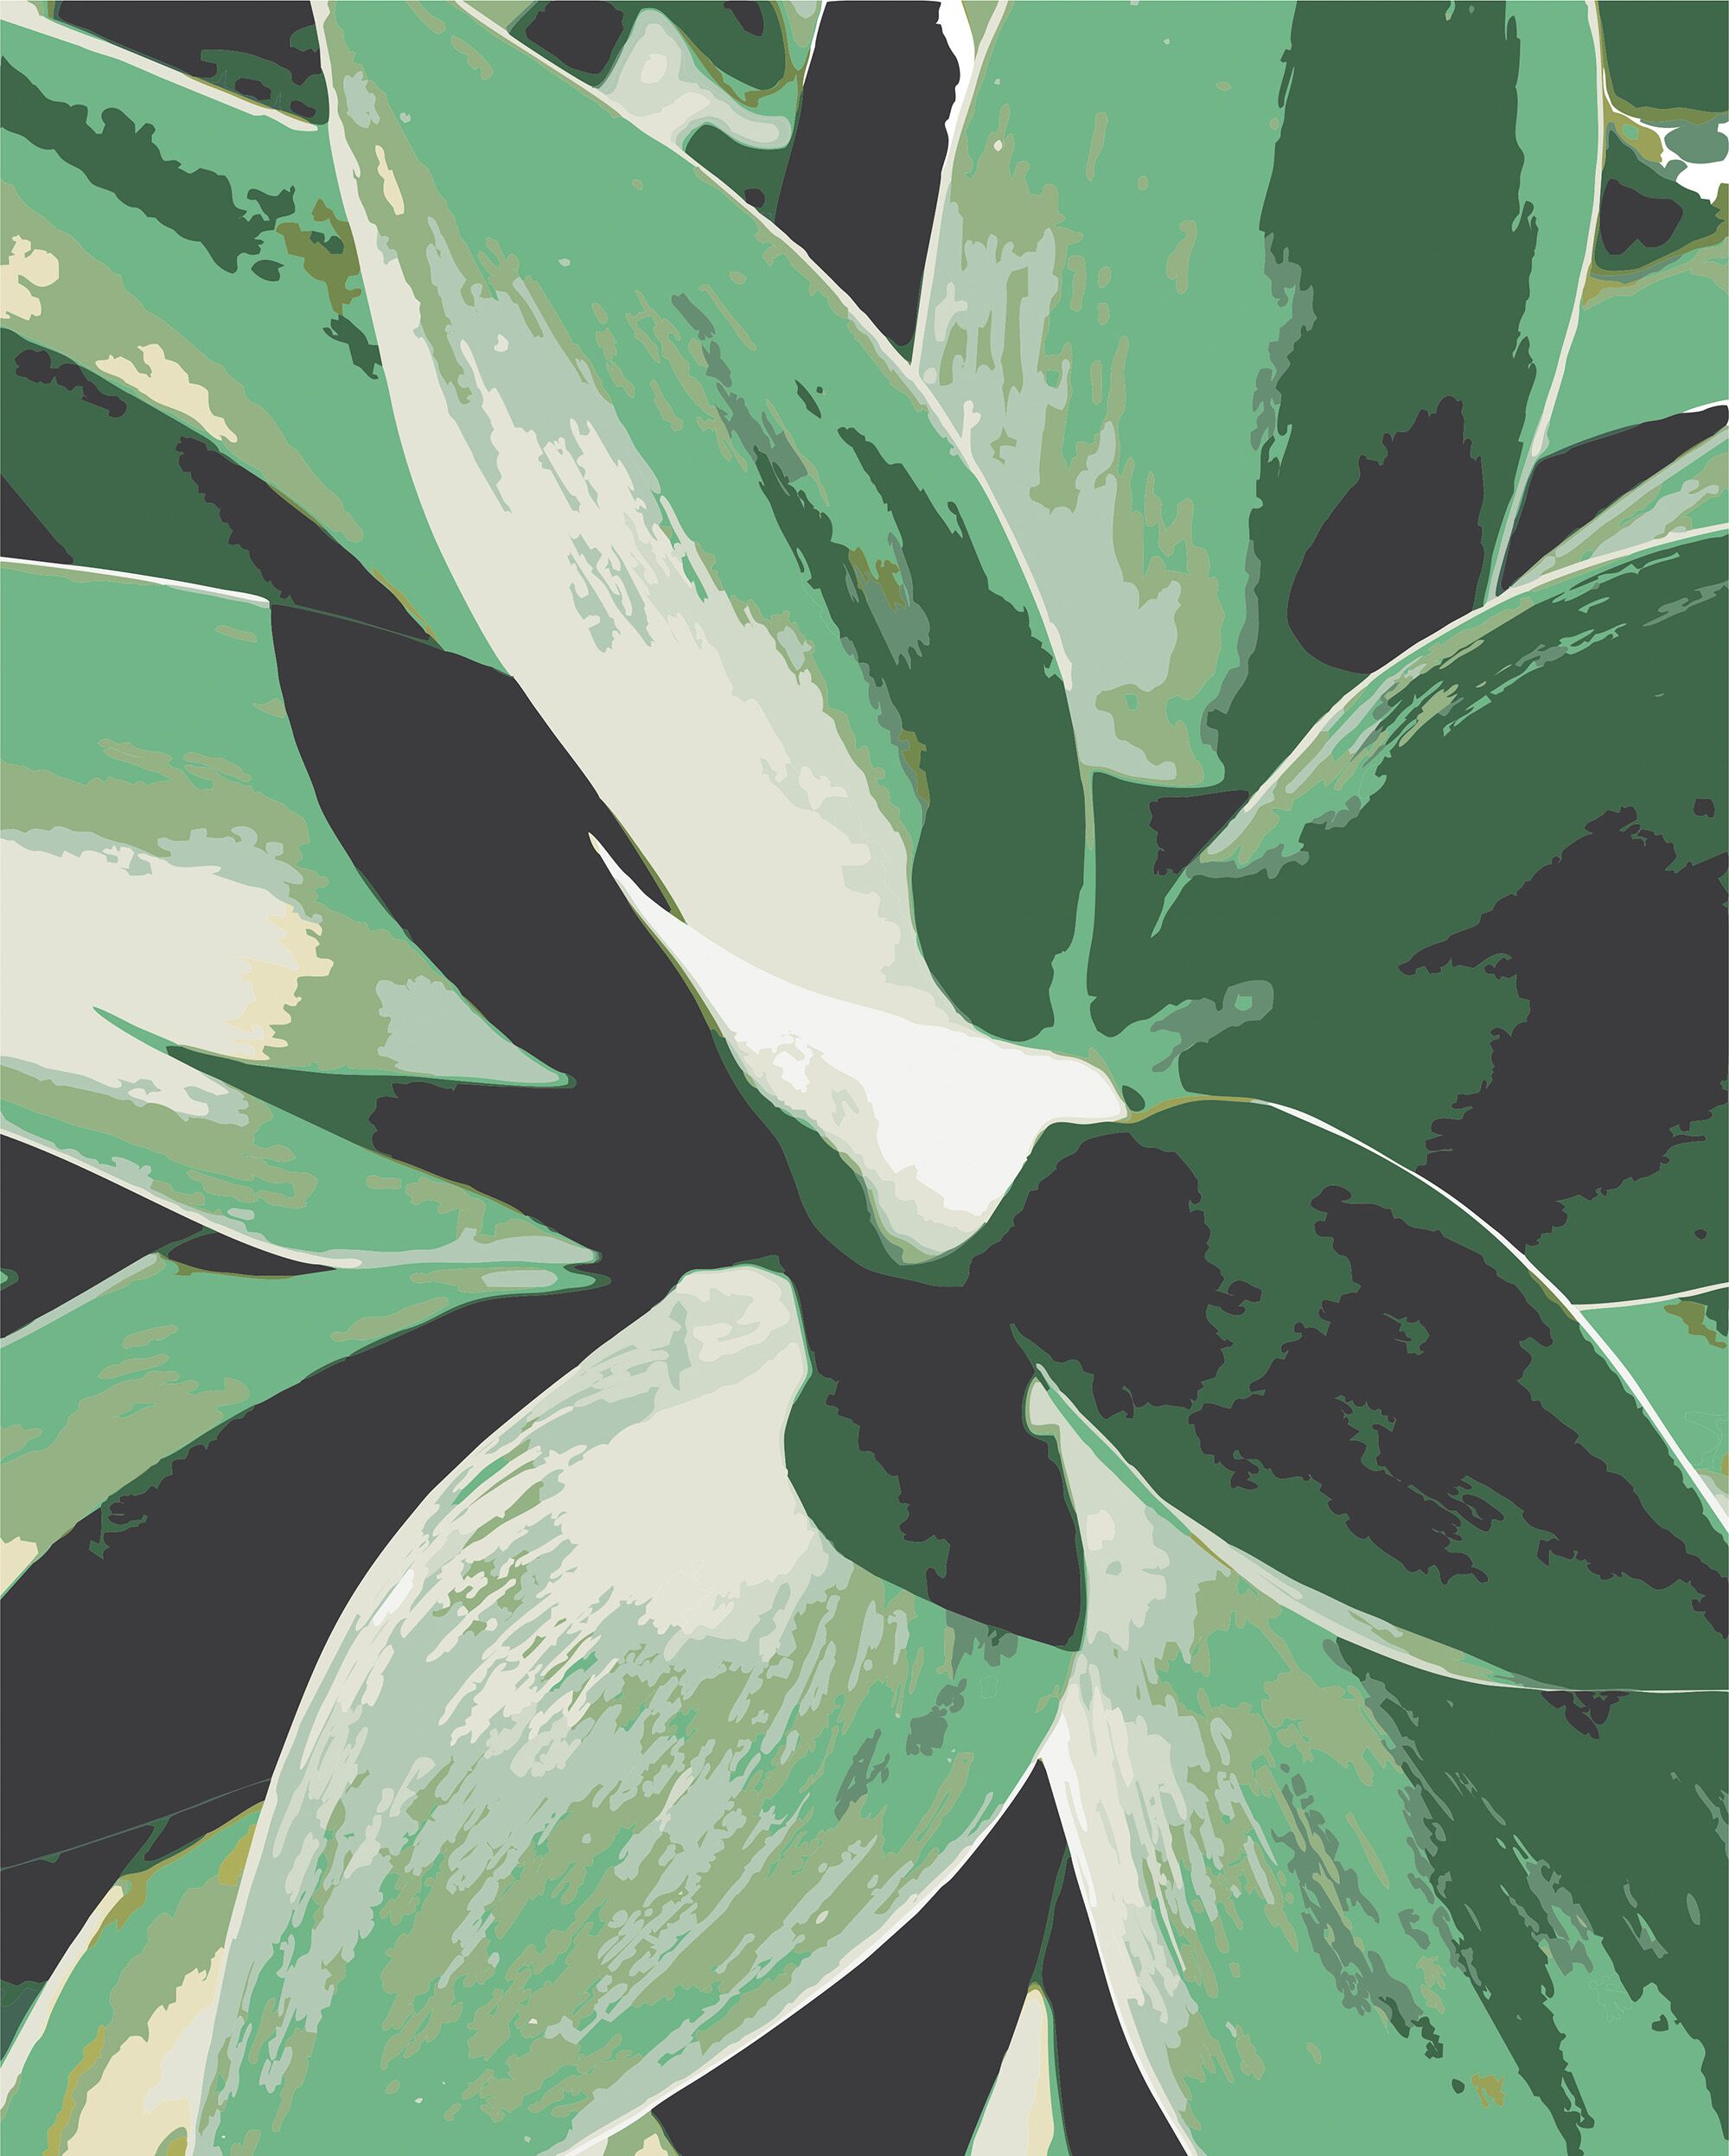 Agave Plant Paint by Numbers Kit (16"x20") by Texture of Dreams. $29